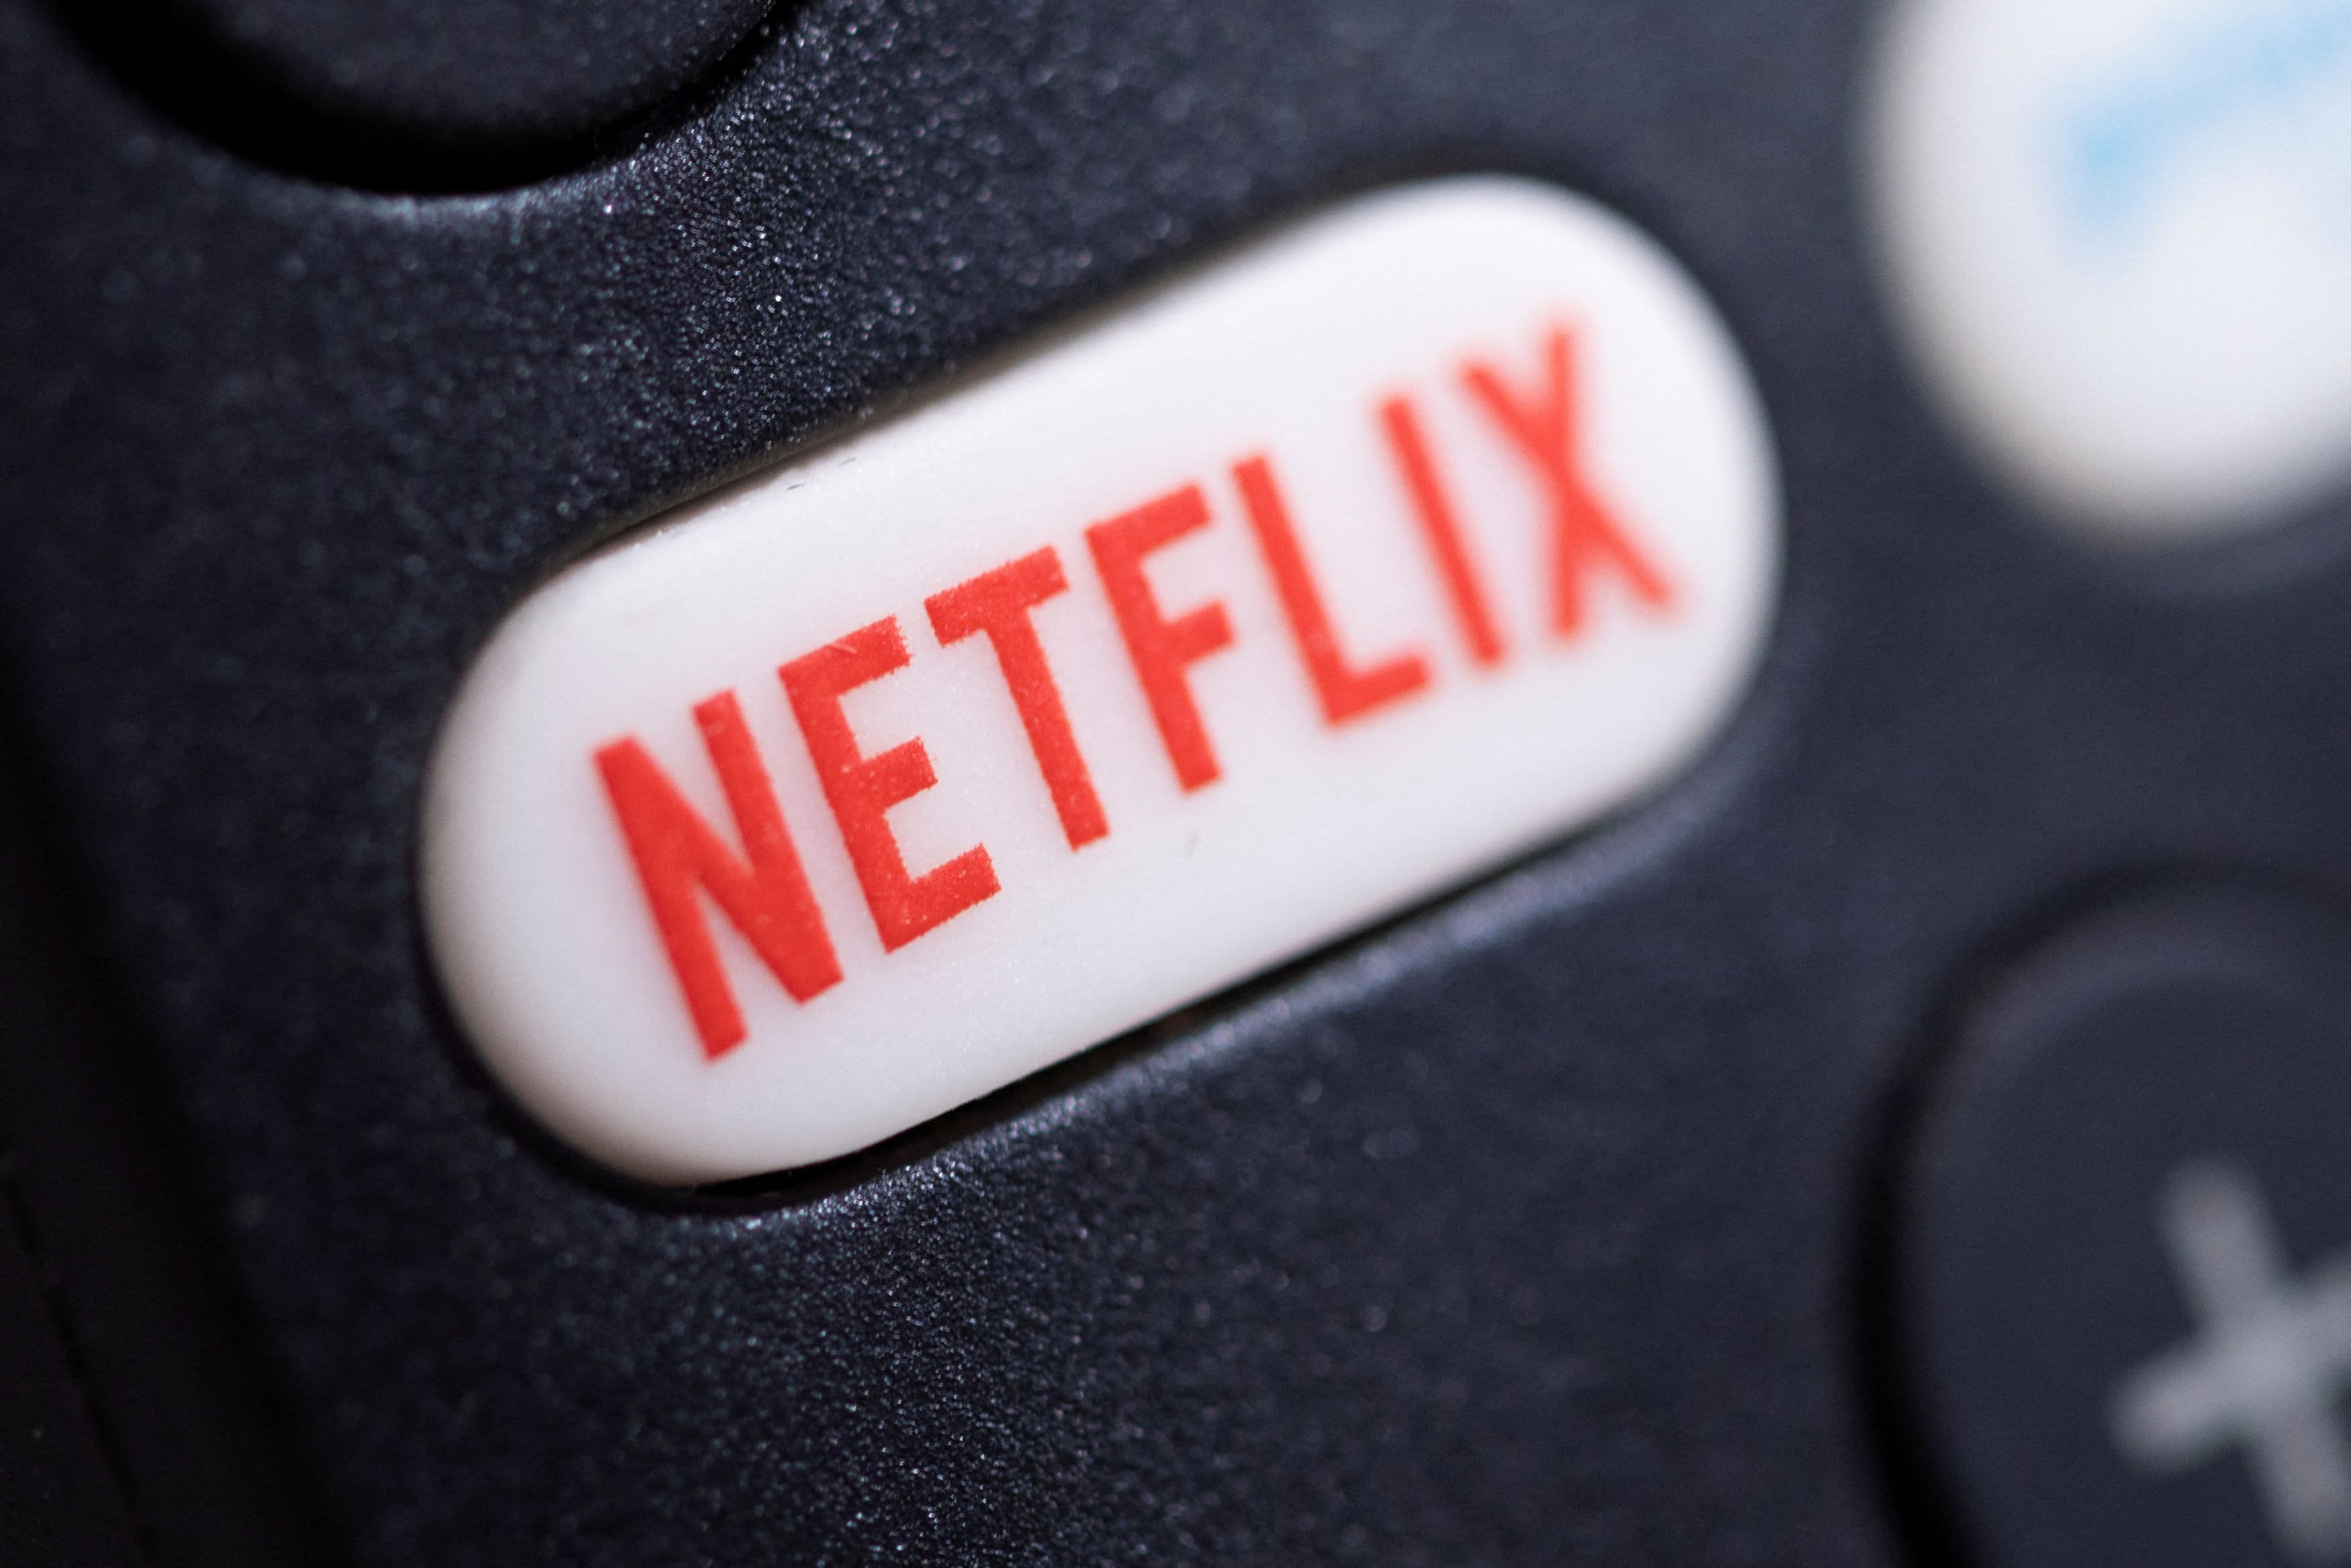 Netflix 'Basic with Ads' is finally here: Price, availability, other details